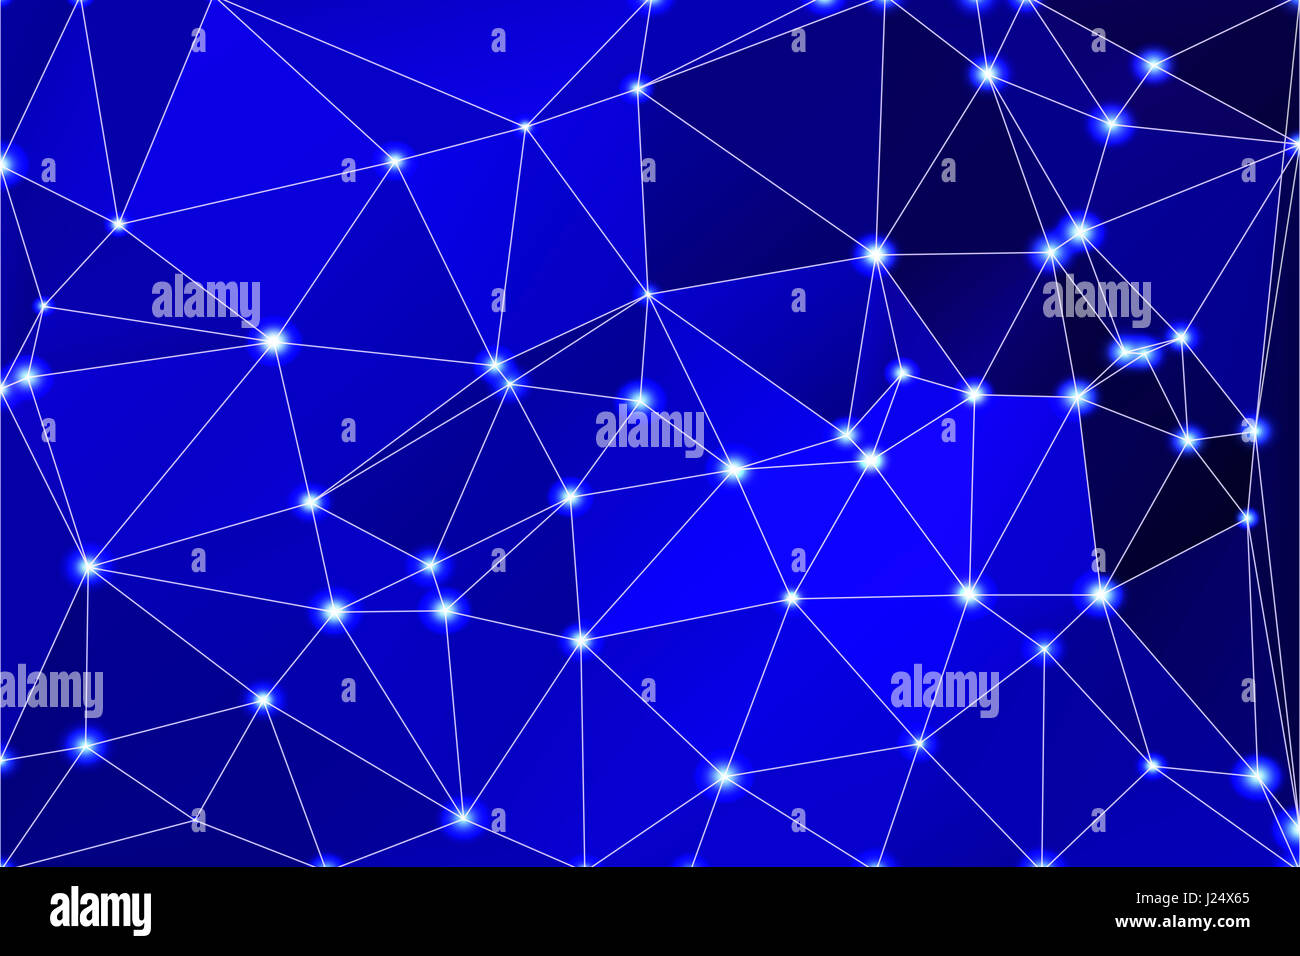 Dark blue abstract low poly geometric background with white triangle mesh and defocused lights. Stock Photo